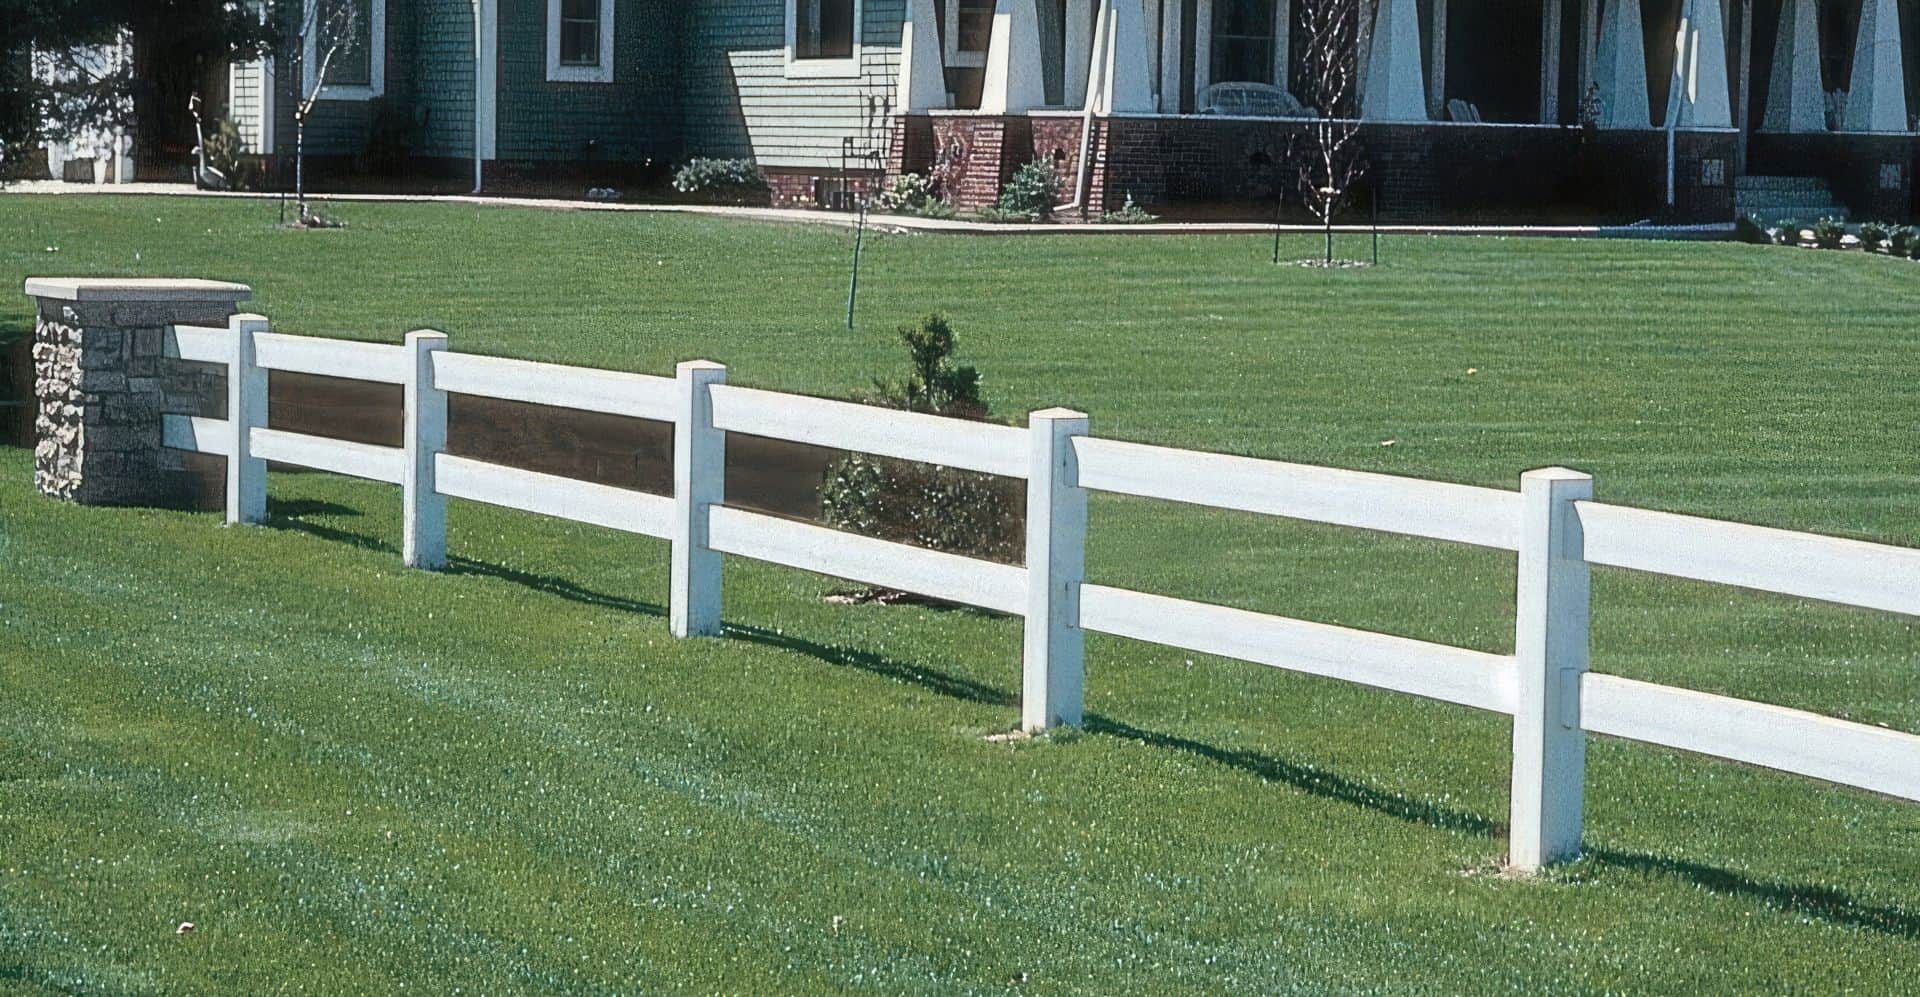 Vinyl 2-rail ranch fence in open field, urban setting. Suburban home with grassy lawn, trees in background.